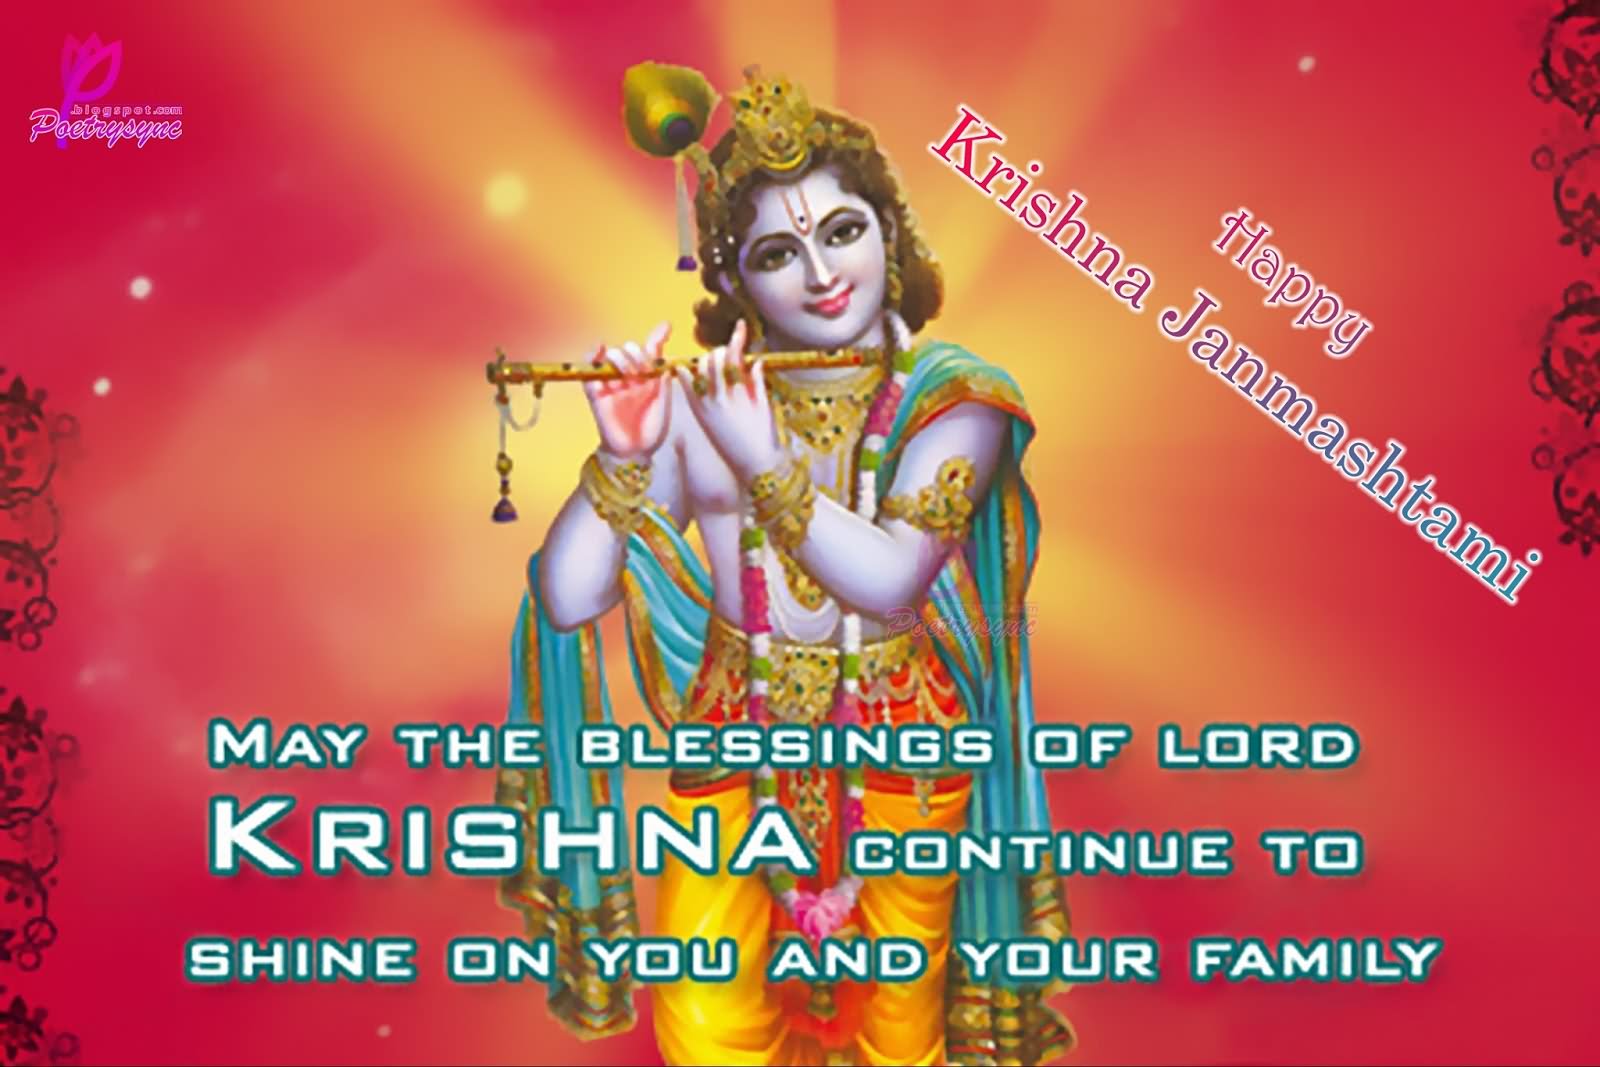 May The Blessings Of Lord Krishna Continue To Shine On You And Your Family